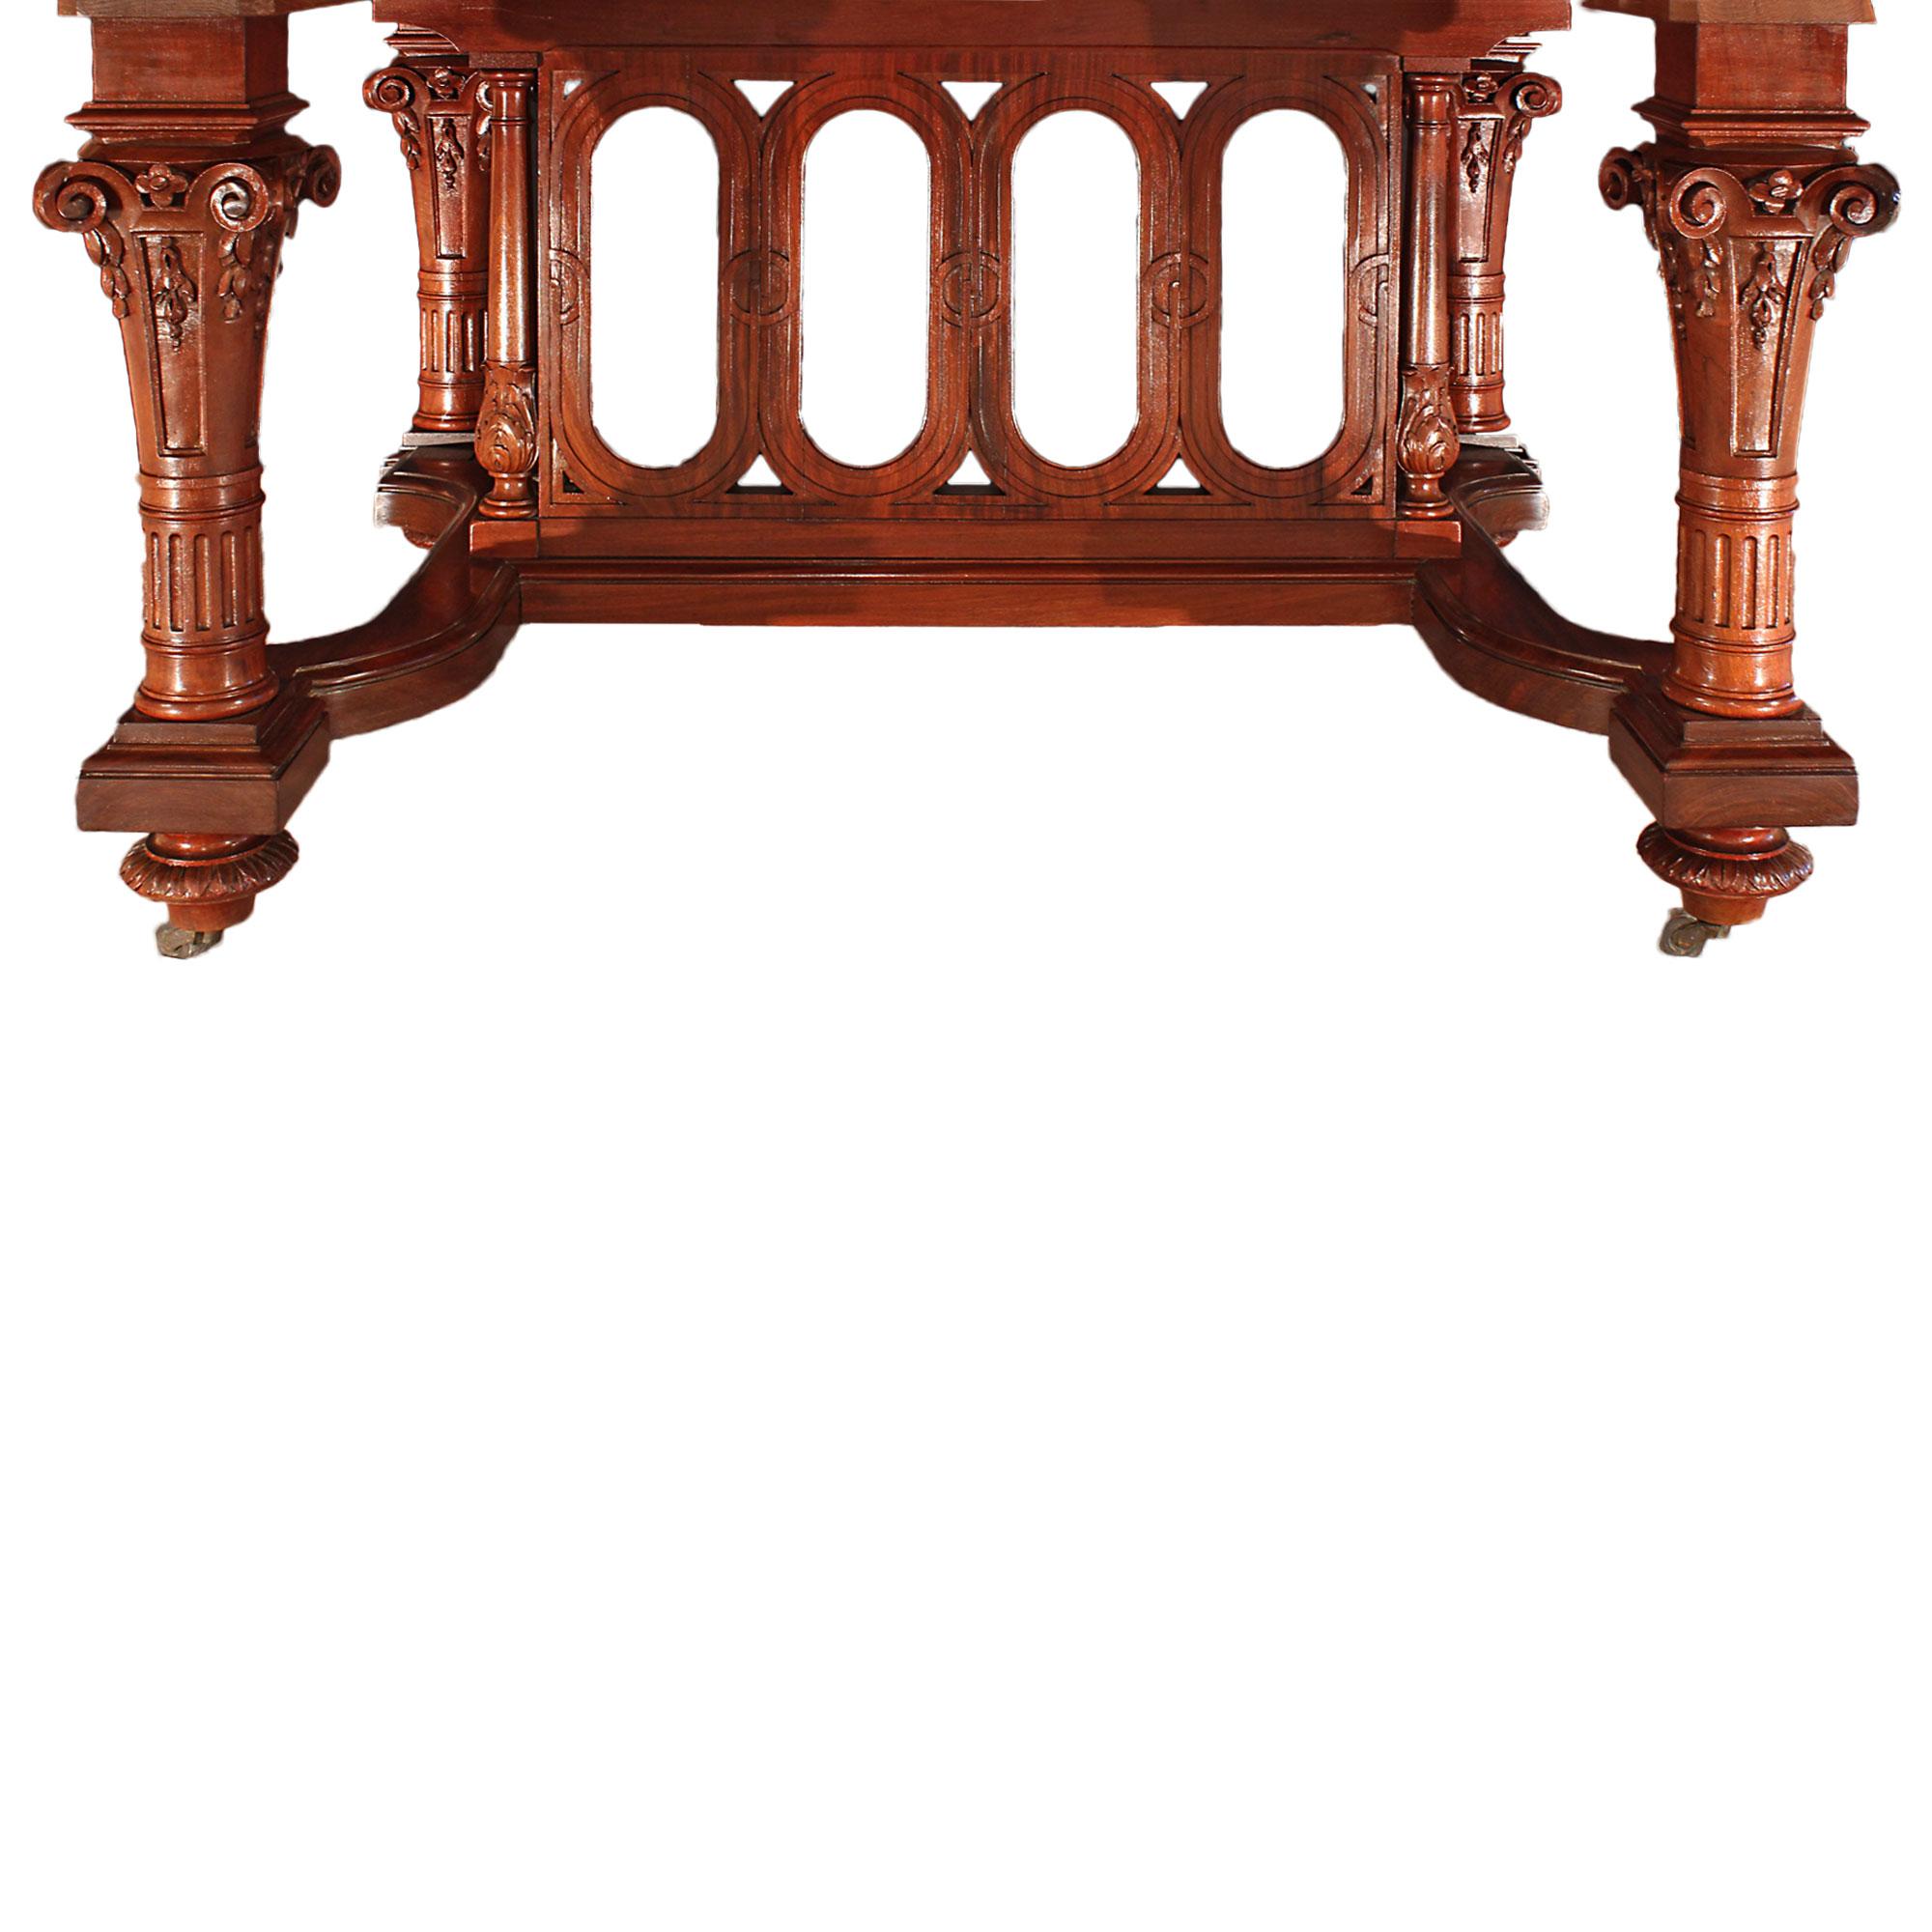 A handsome French 19th century Louis XVI st. solid mahogany dining table with the original four extensions. The table has a richly carved central pedestal with four fluted tapered columns raised by topie shaped supports. The columns are decorated by